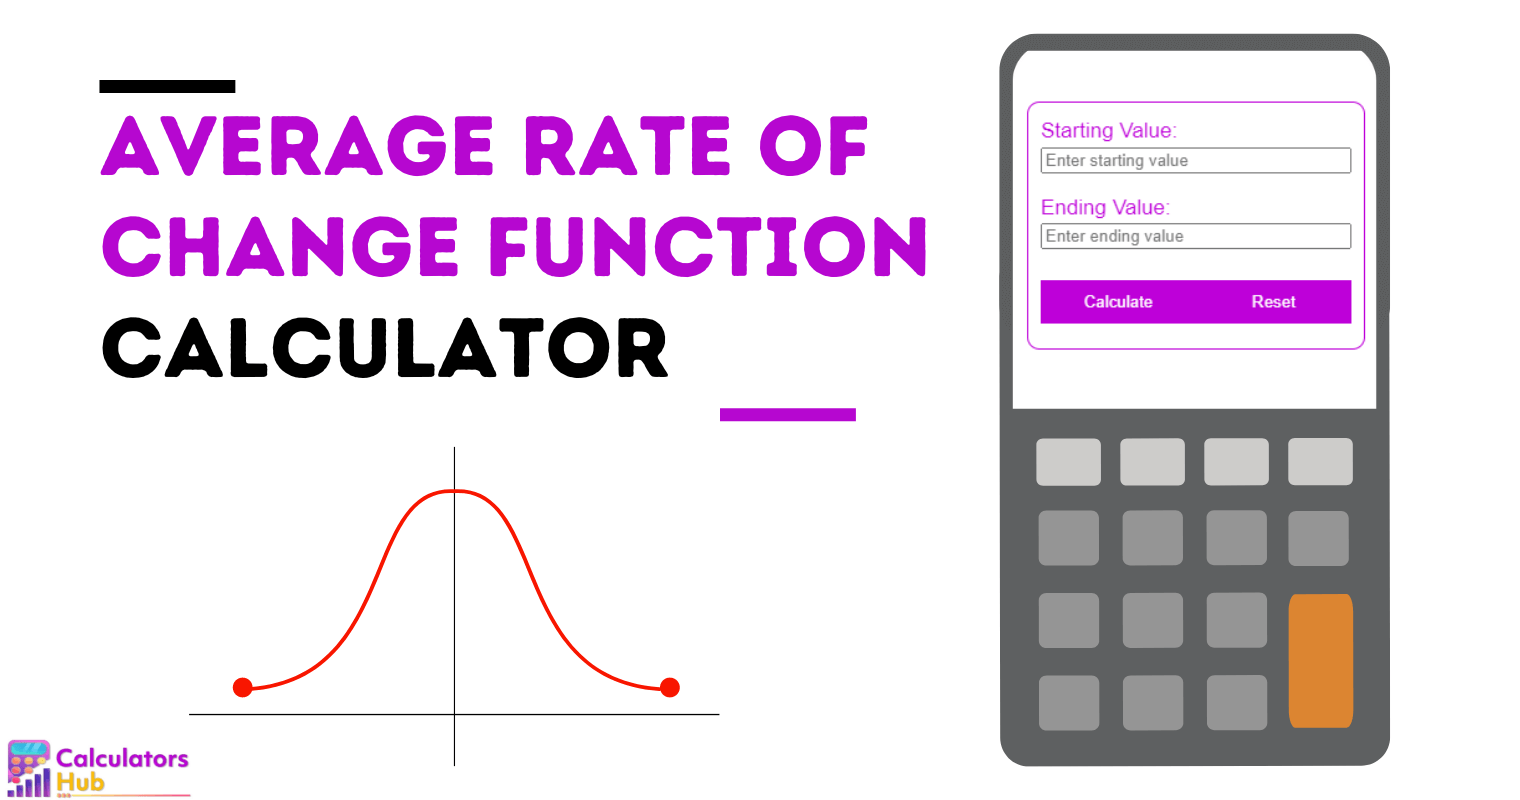 Average Rate of Change Function Calculator